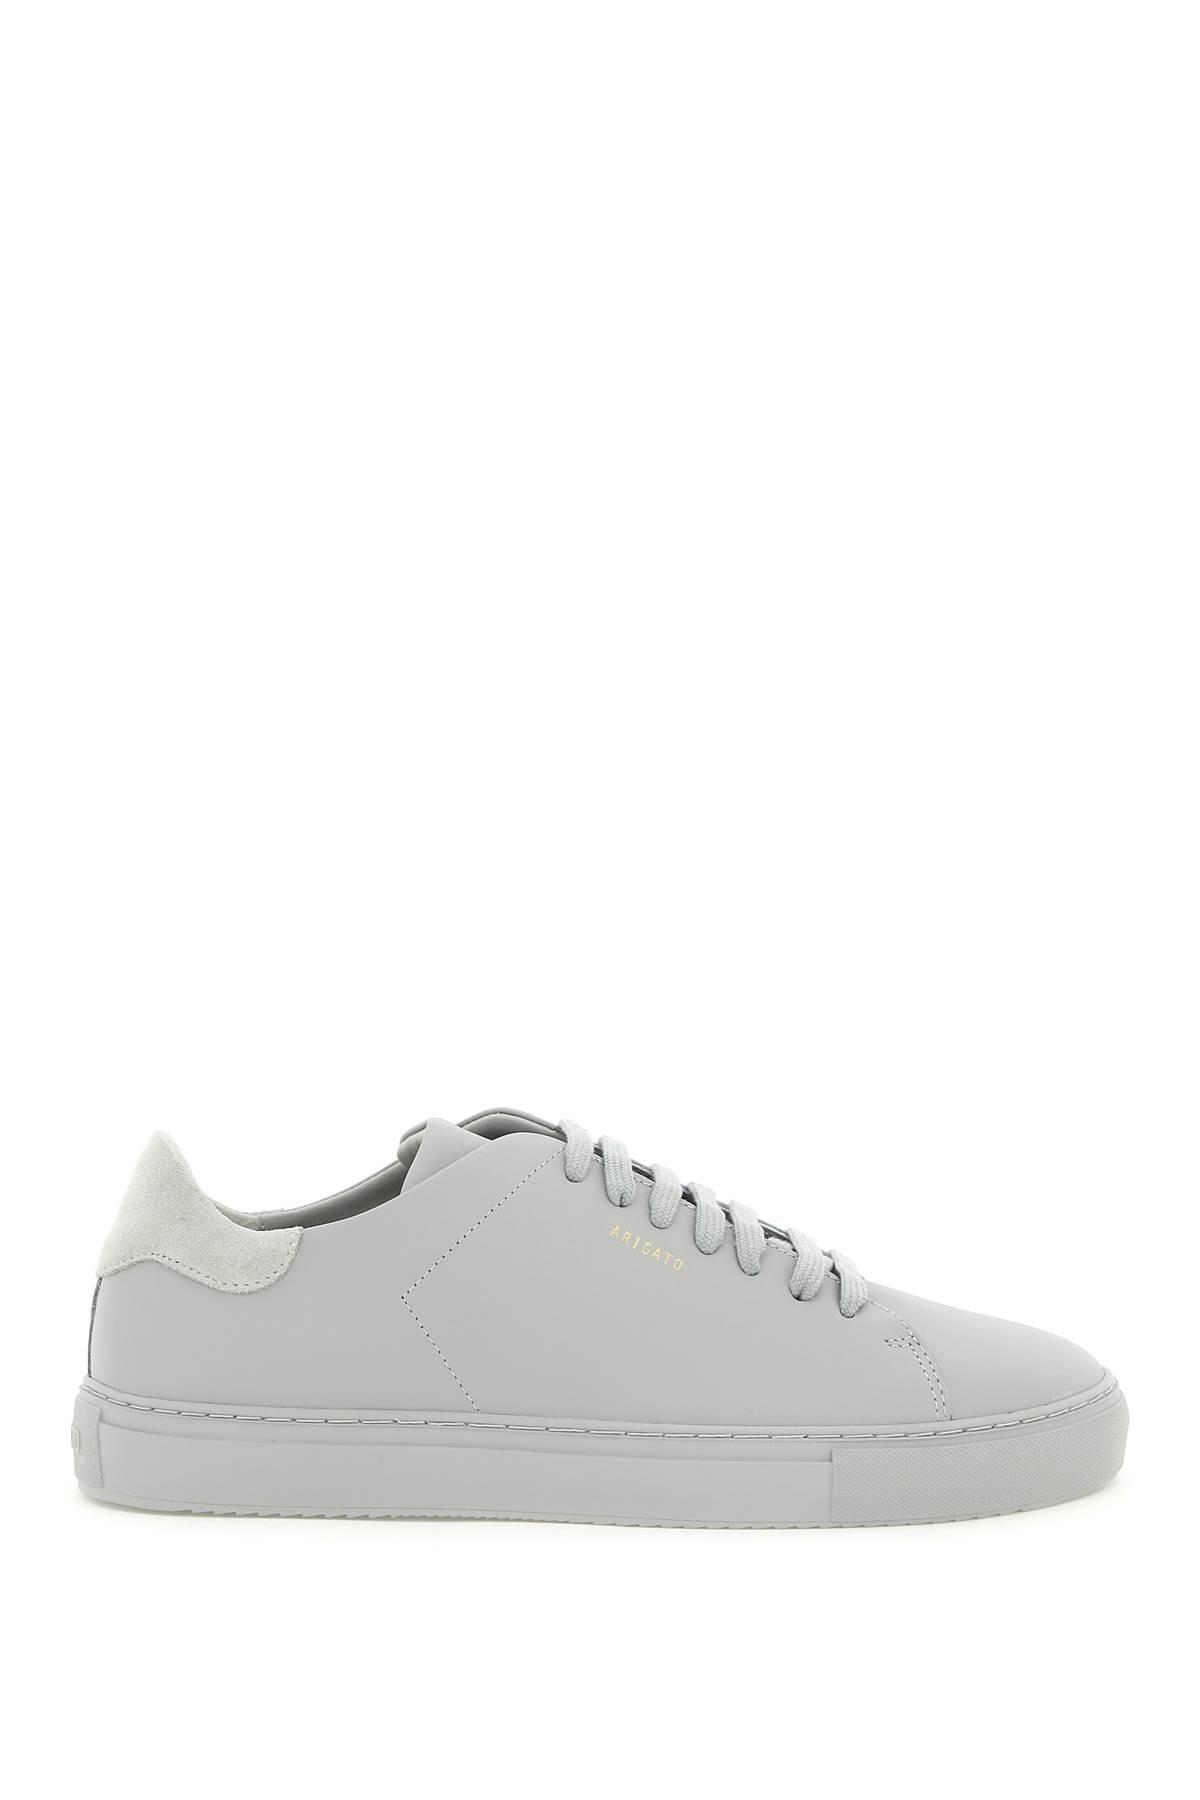 Axel Arigato Clean 90 Leather Sneakers in White for Men | Lyst